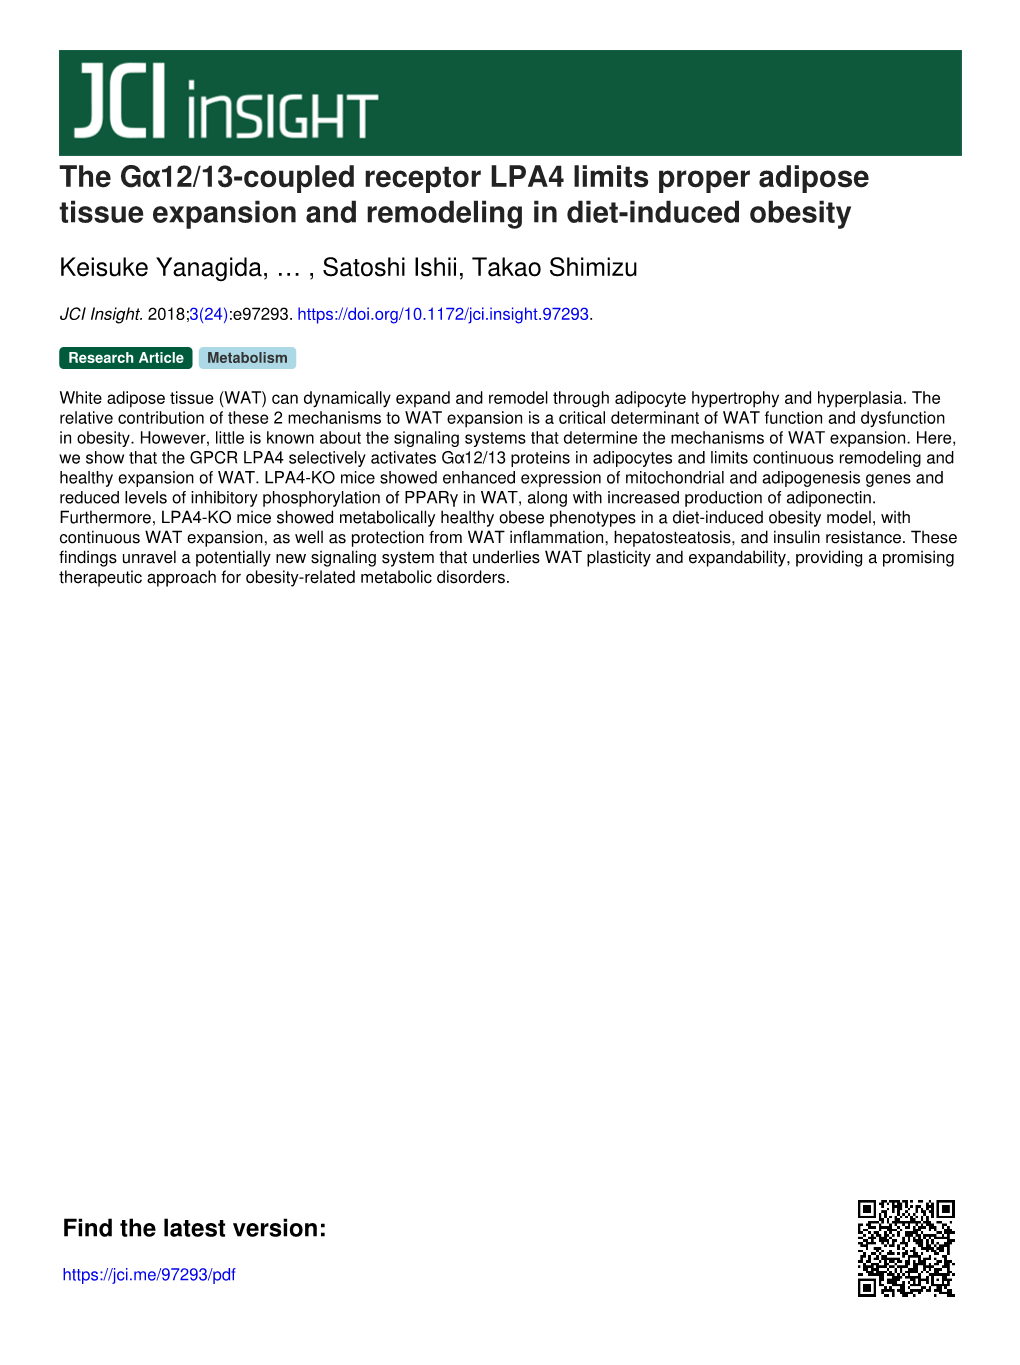 The Gα12/13-Coupled Receptor LPA4 Limits Proper Adipose Tissue Expansion and Remodeling in Diet-Induced Obesity